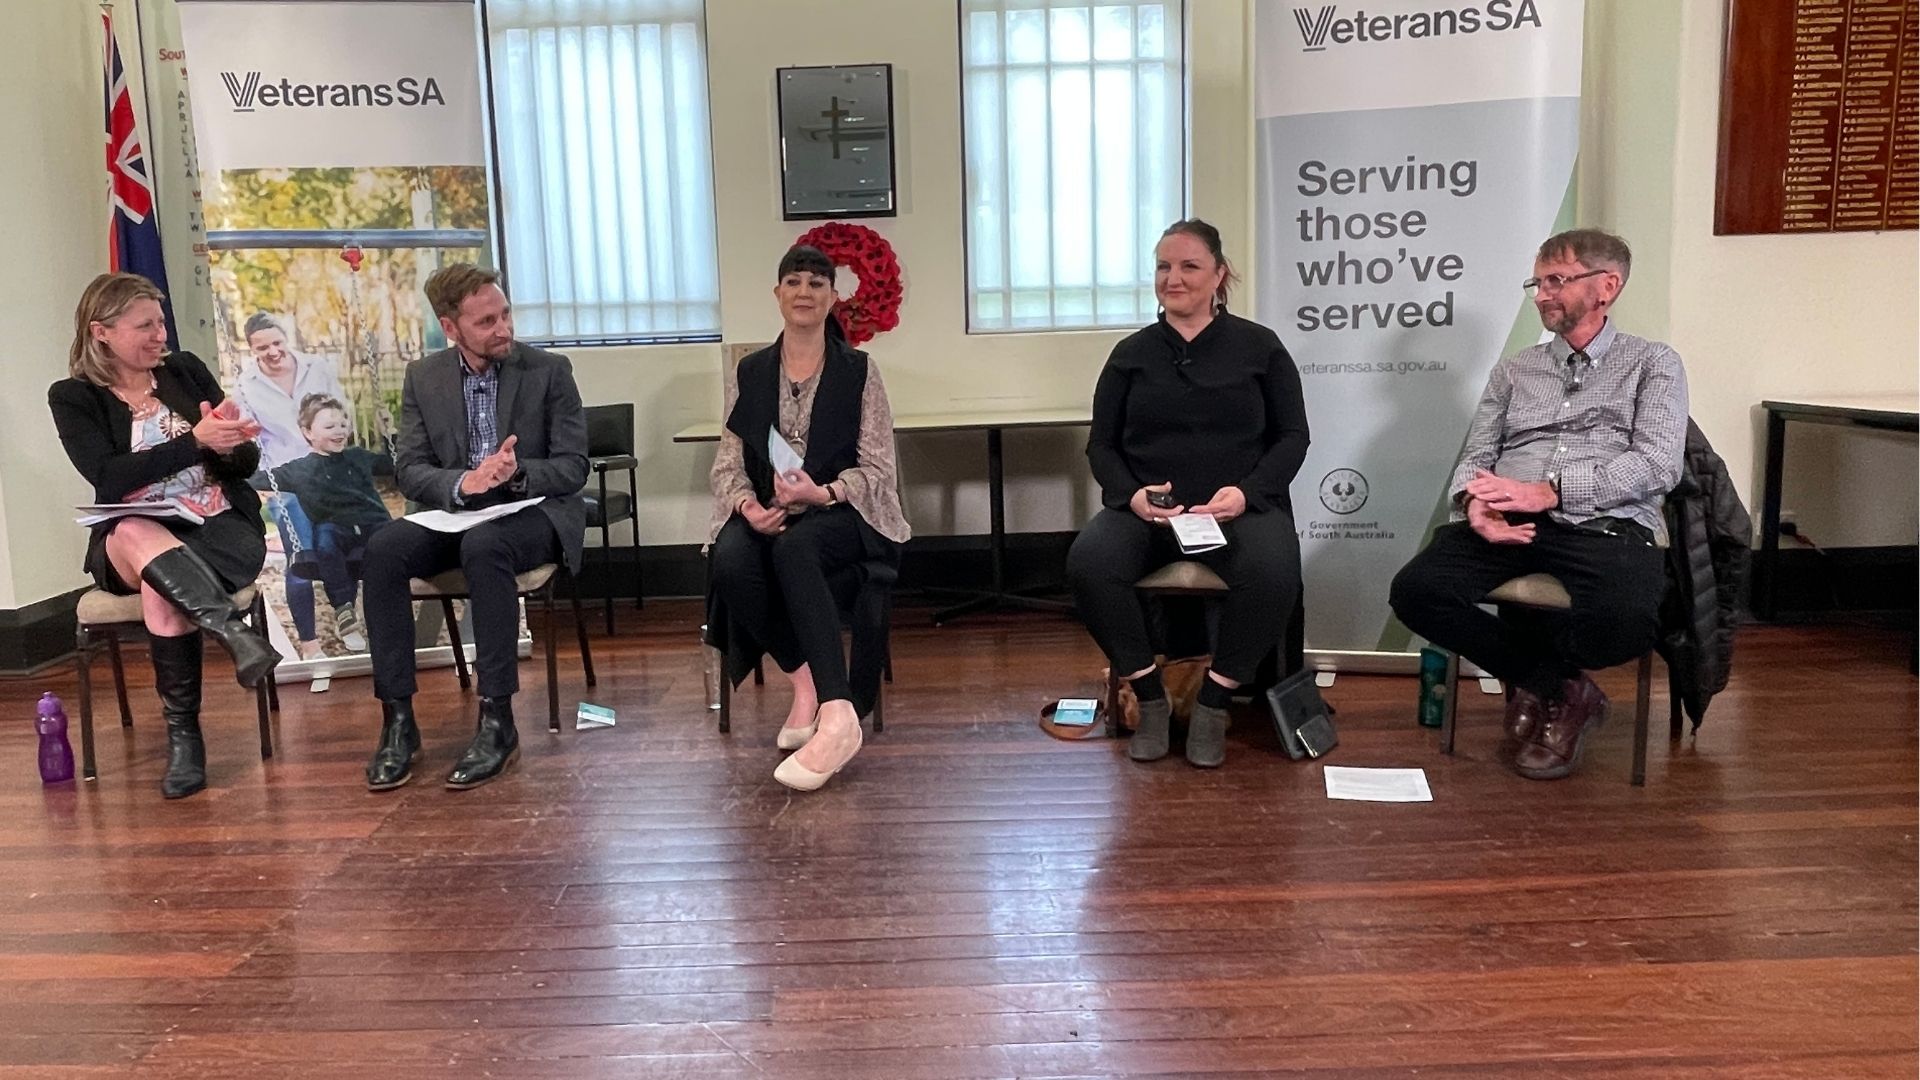 Five participants seated in front of pull up banners at a Veterans SA Community Conversation event